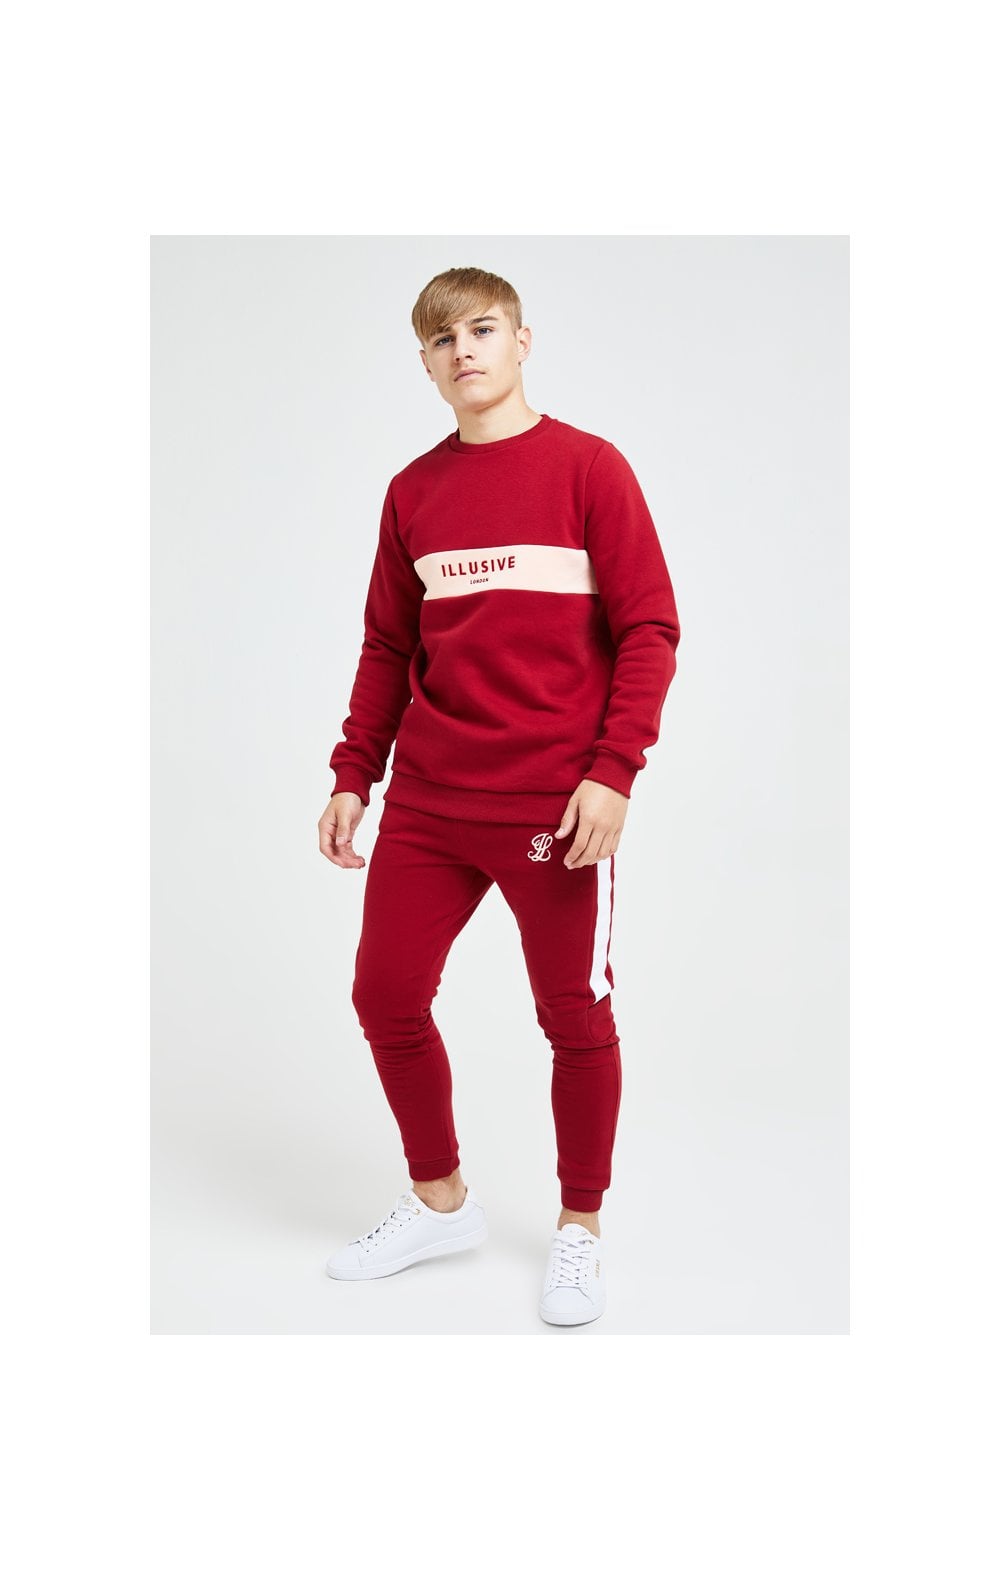 Illusive London Divergence Crew Sweater - Red & Pink (3)